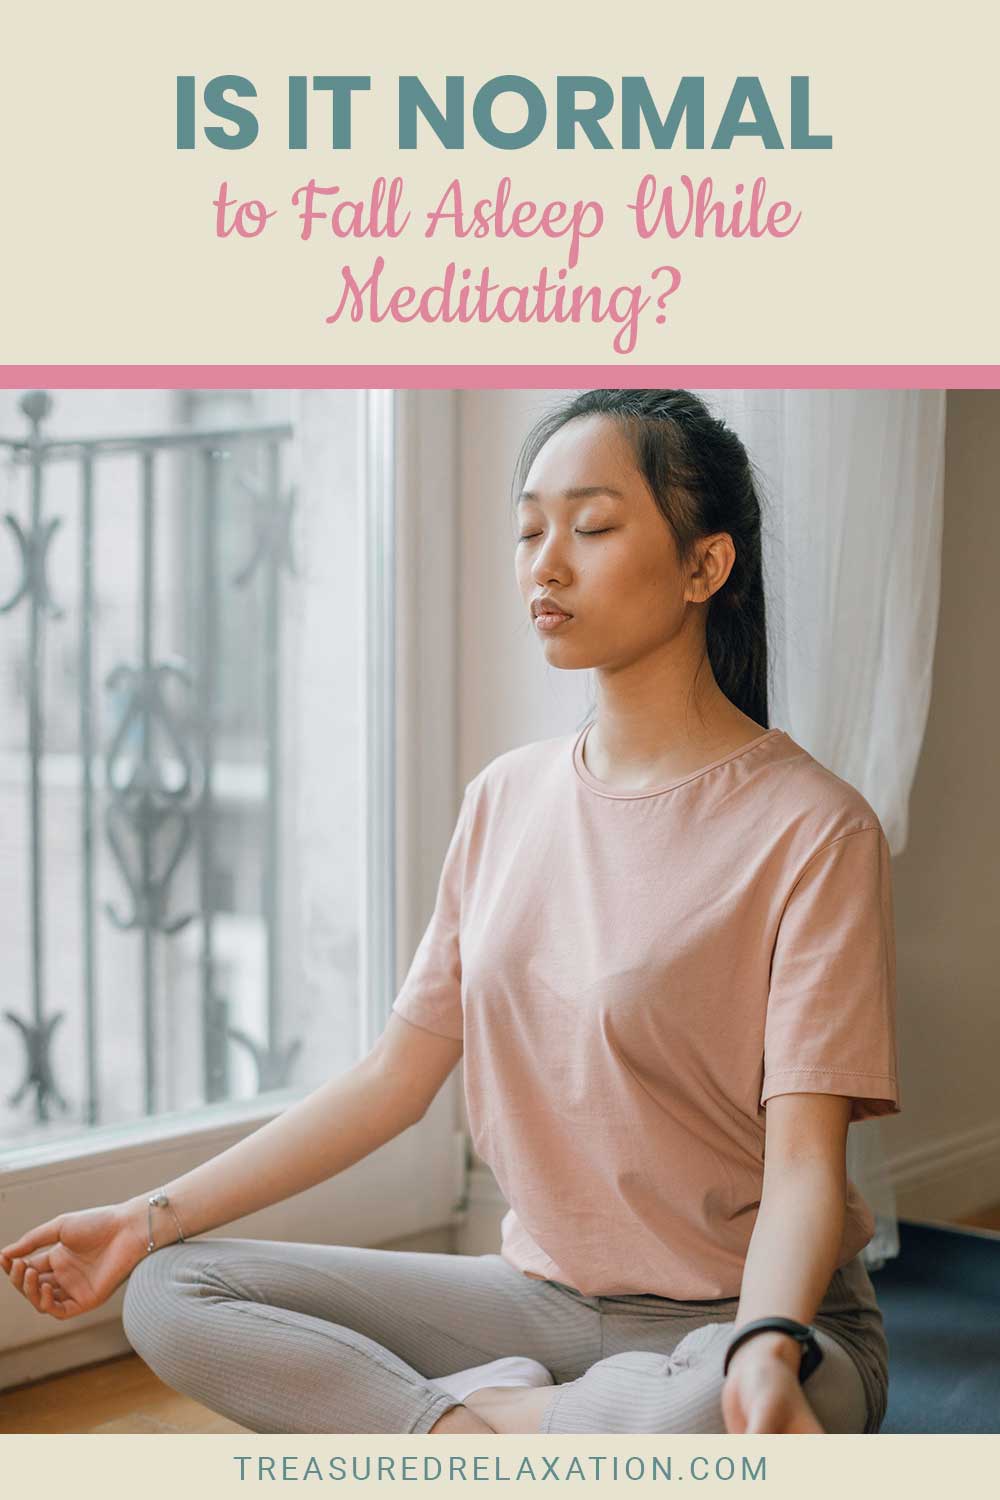 Is It Normal to Fall Asleep While Meditating?